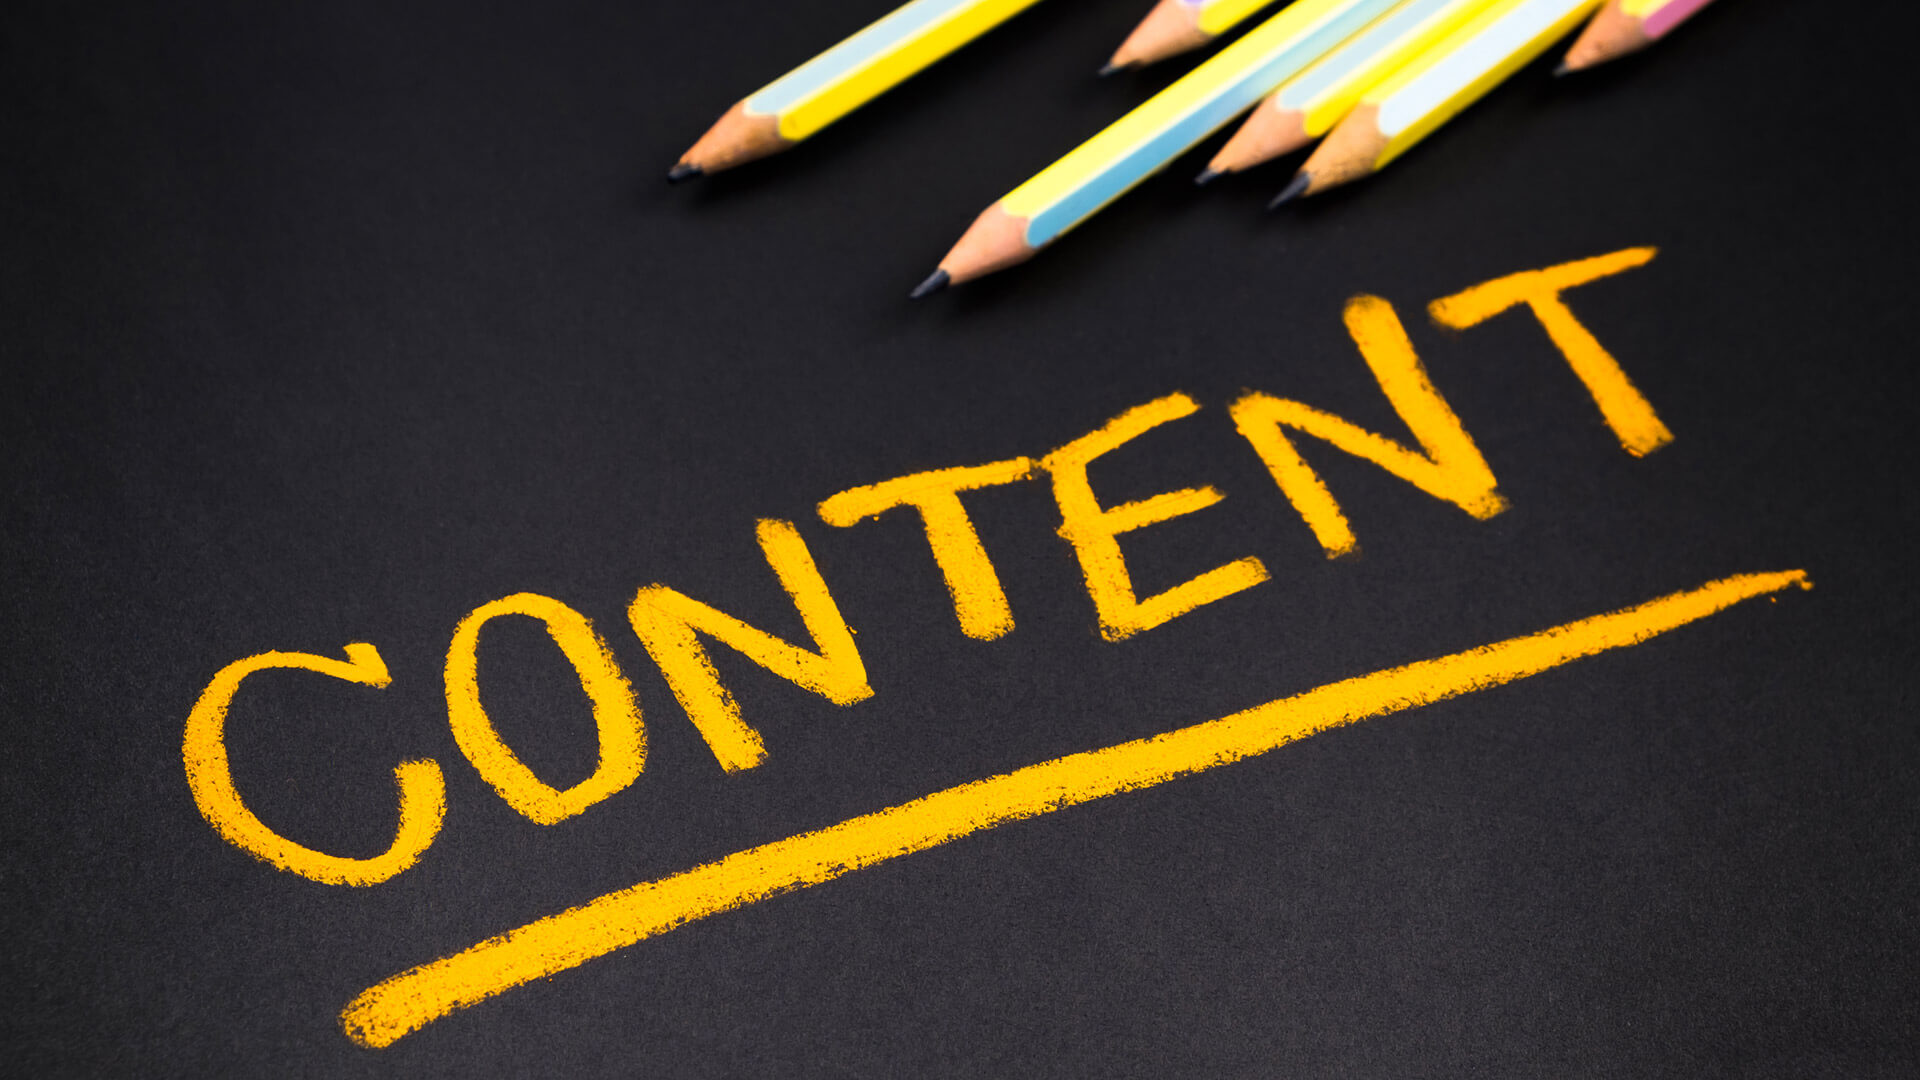 4Horsemen SEO India offering quality content writing services